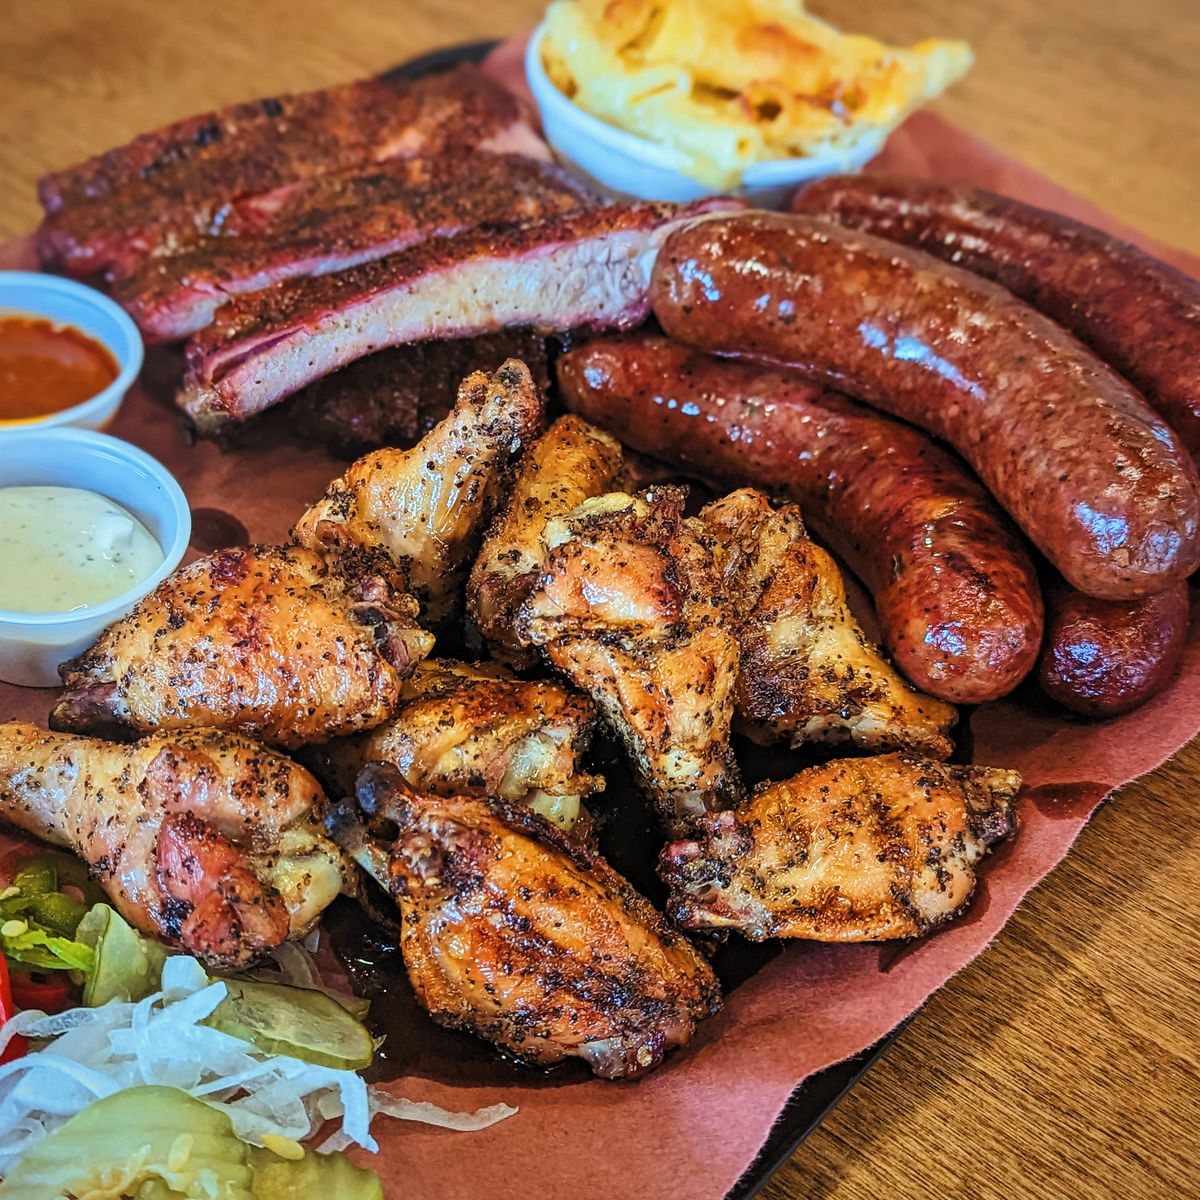 Platter of smoked ribs, sausage links, and smoked chicken wings. 